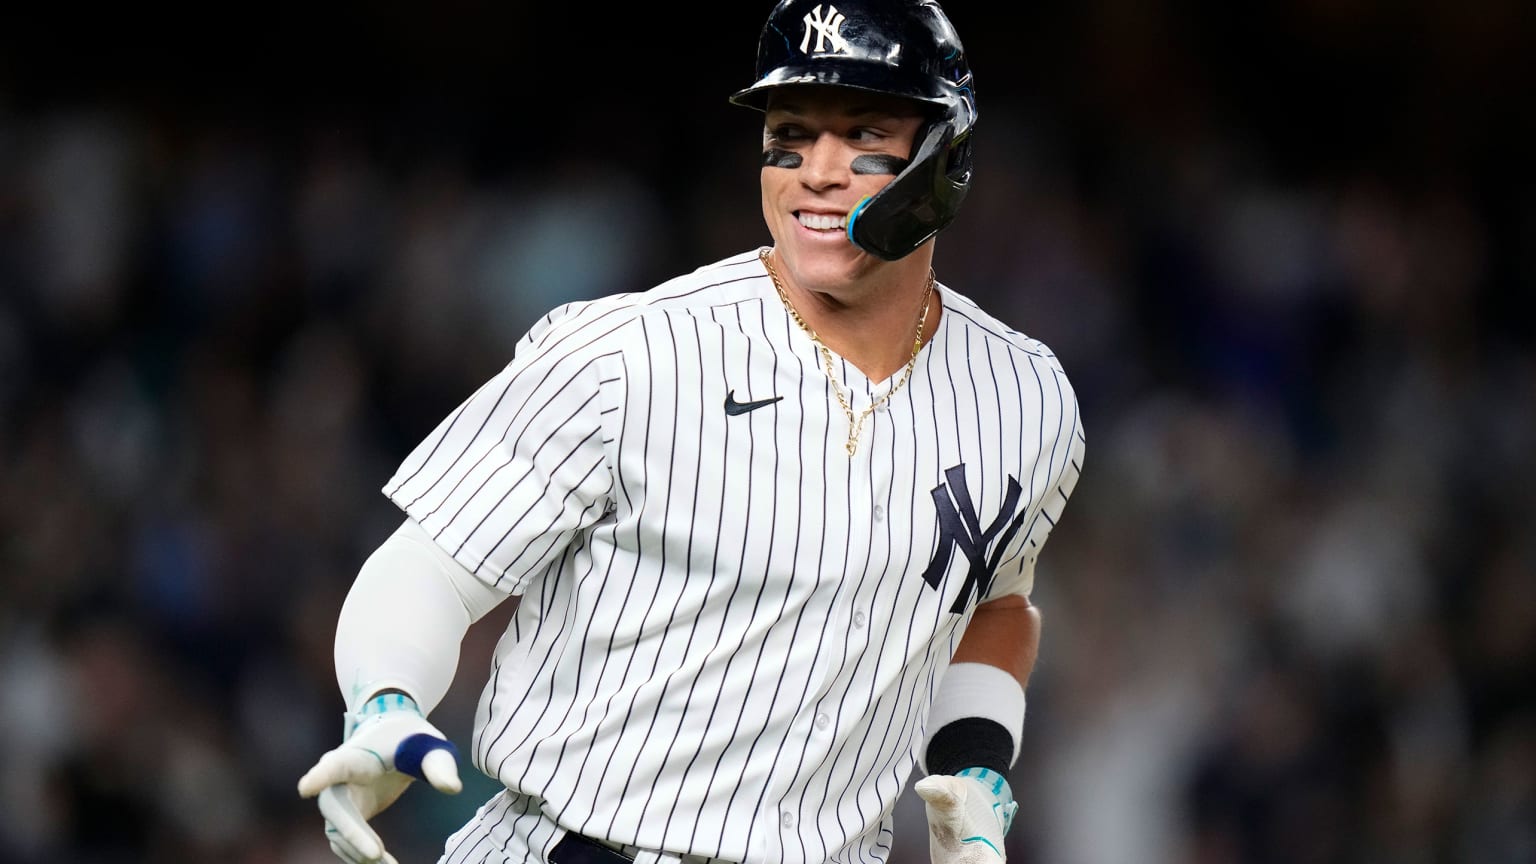 Aaron Judge smiles and points as he rounds the bases